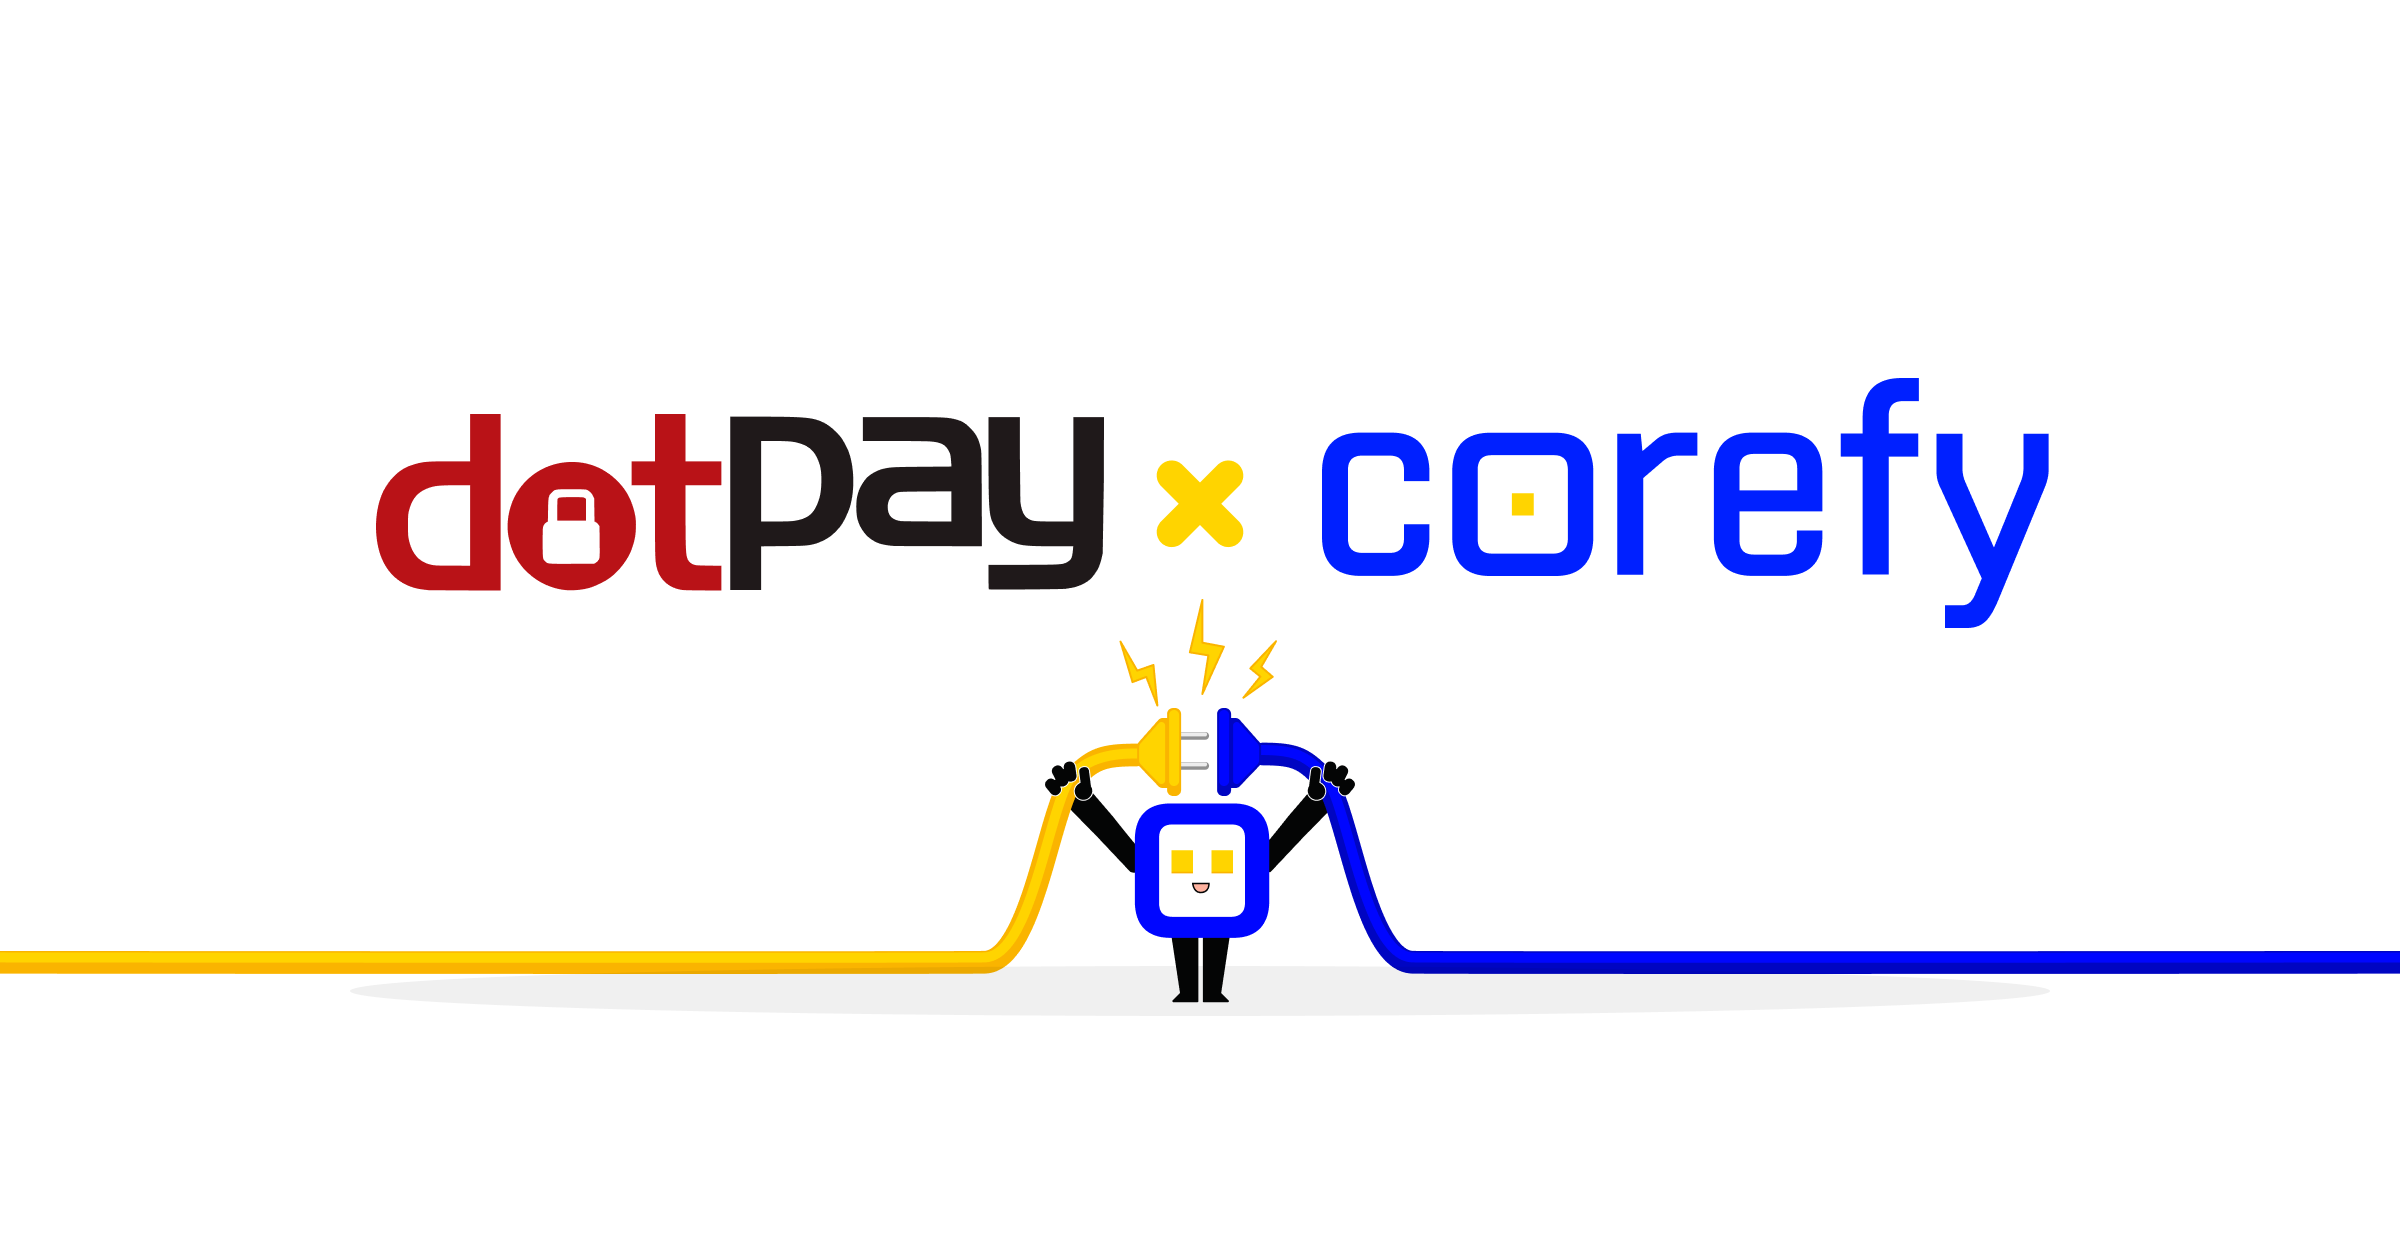 New integration with Dotpay